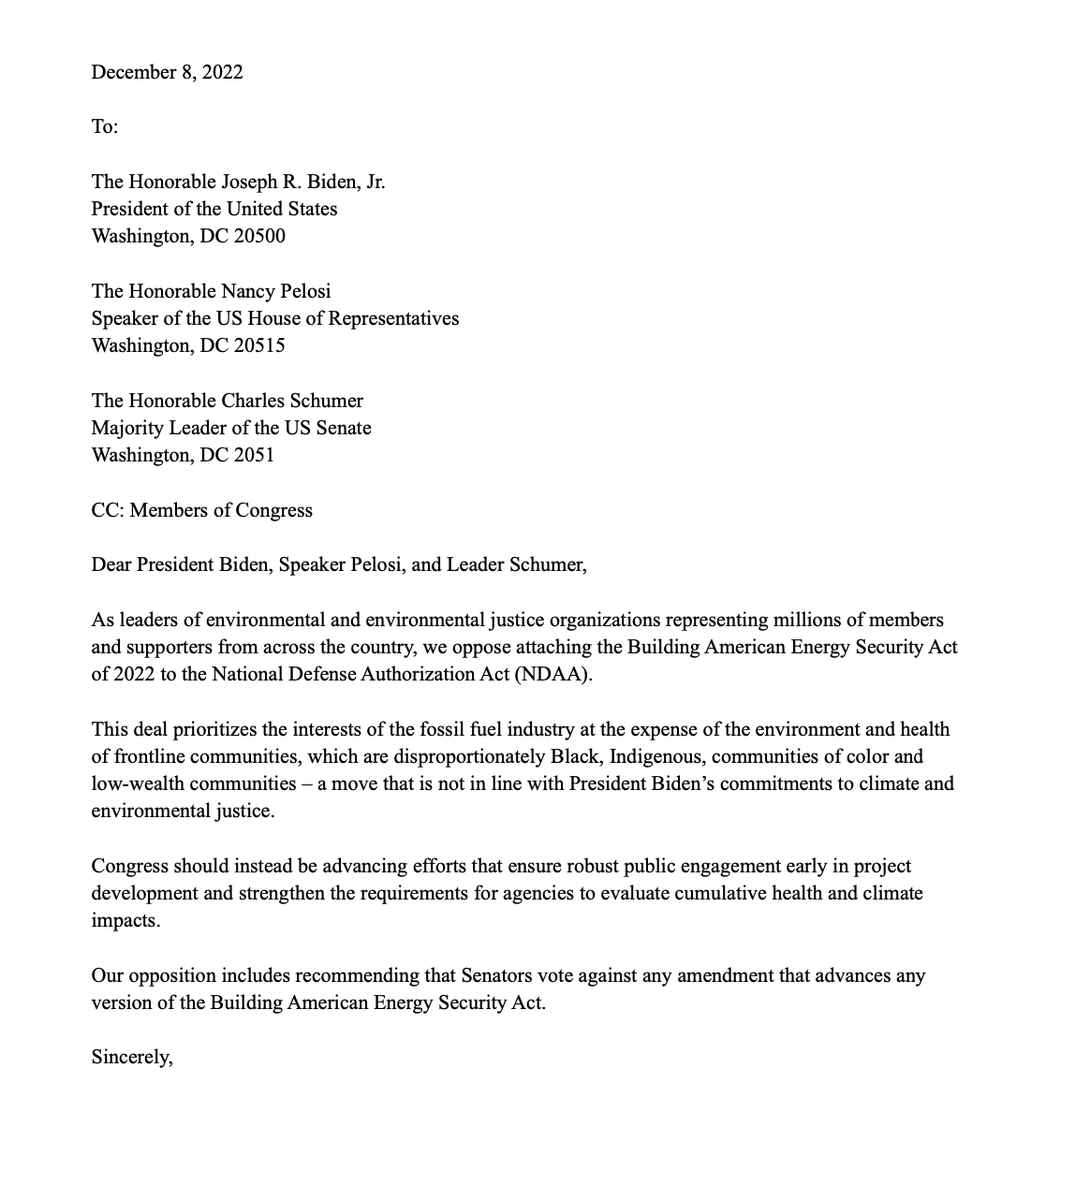 We just blocked @Sen_JoeManchin's #DirtyDeal from being included in House NDAA — so OF COURSE he turned around to try & include it in the Senate version 🙄 Manchin won't give up, so neither will we! EDs of 45+ orgs just sent this letter to ensure leadership stands strong.